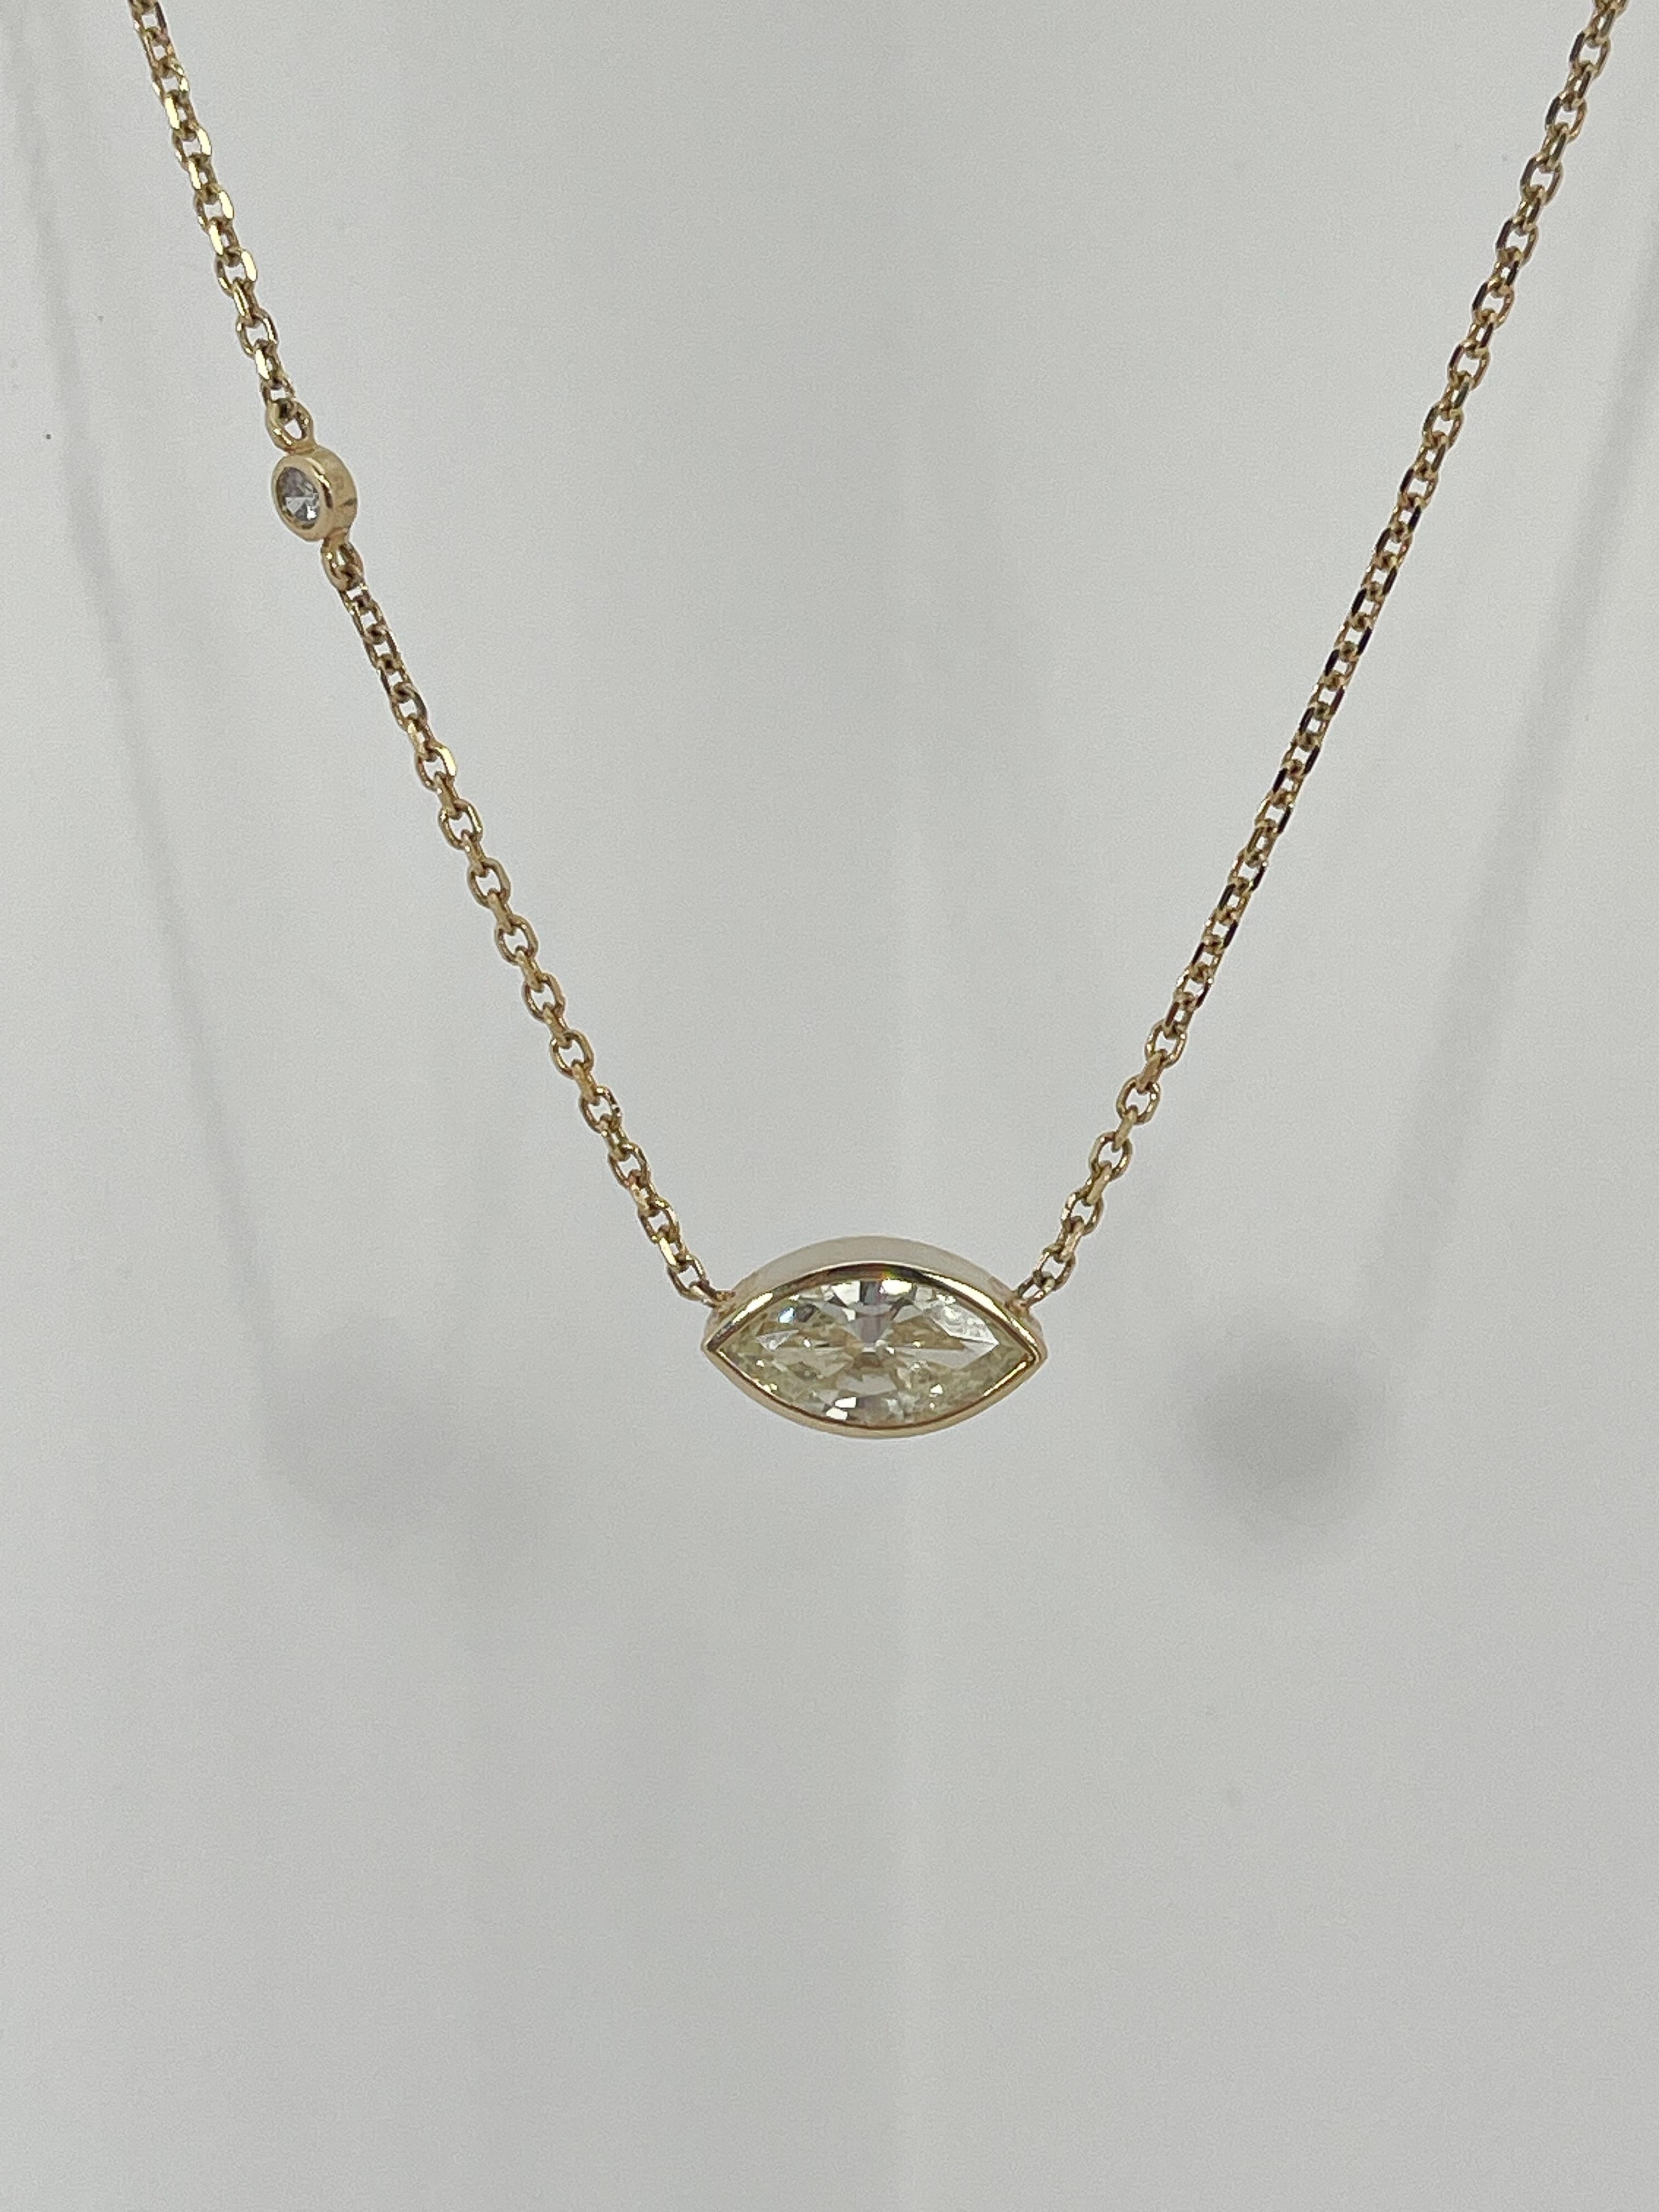 Marquise Cut 14K Yellow Gold Bezel Set 1.62 CTW Marquise Diamond Necklace For Sale